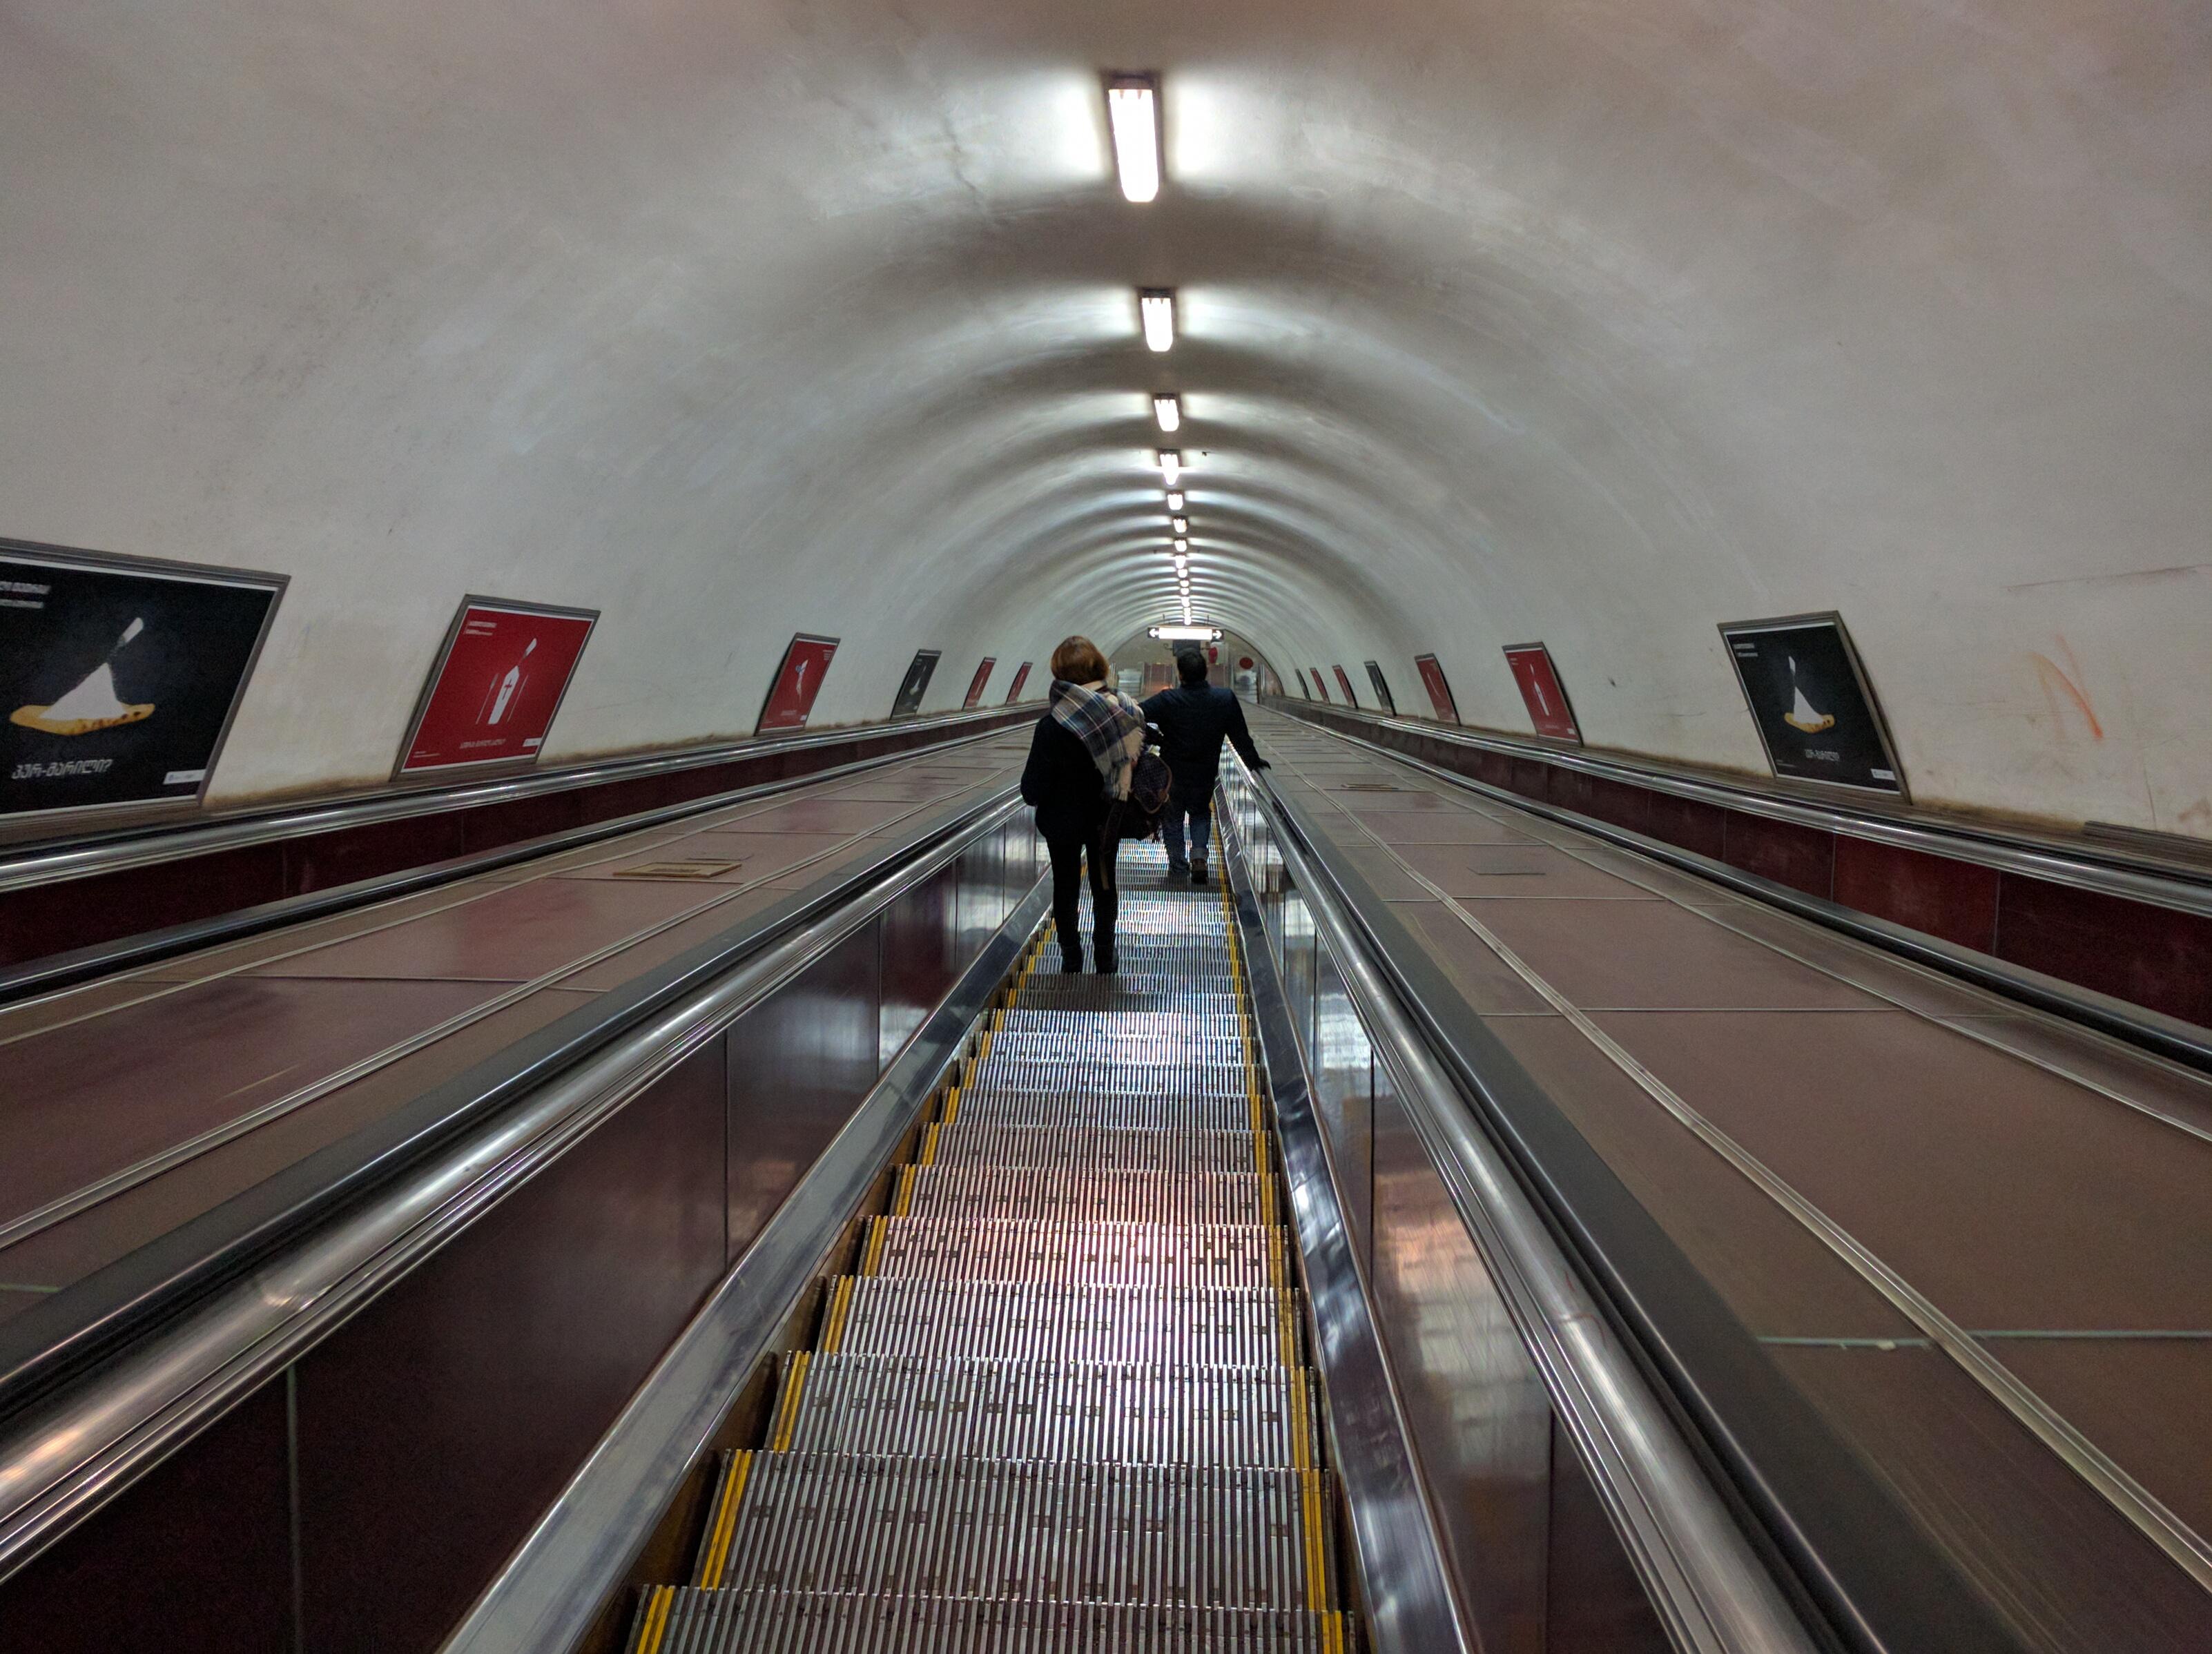 Cover image of this place Metro of Tbilisi